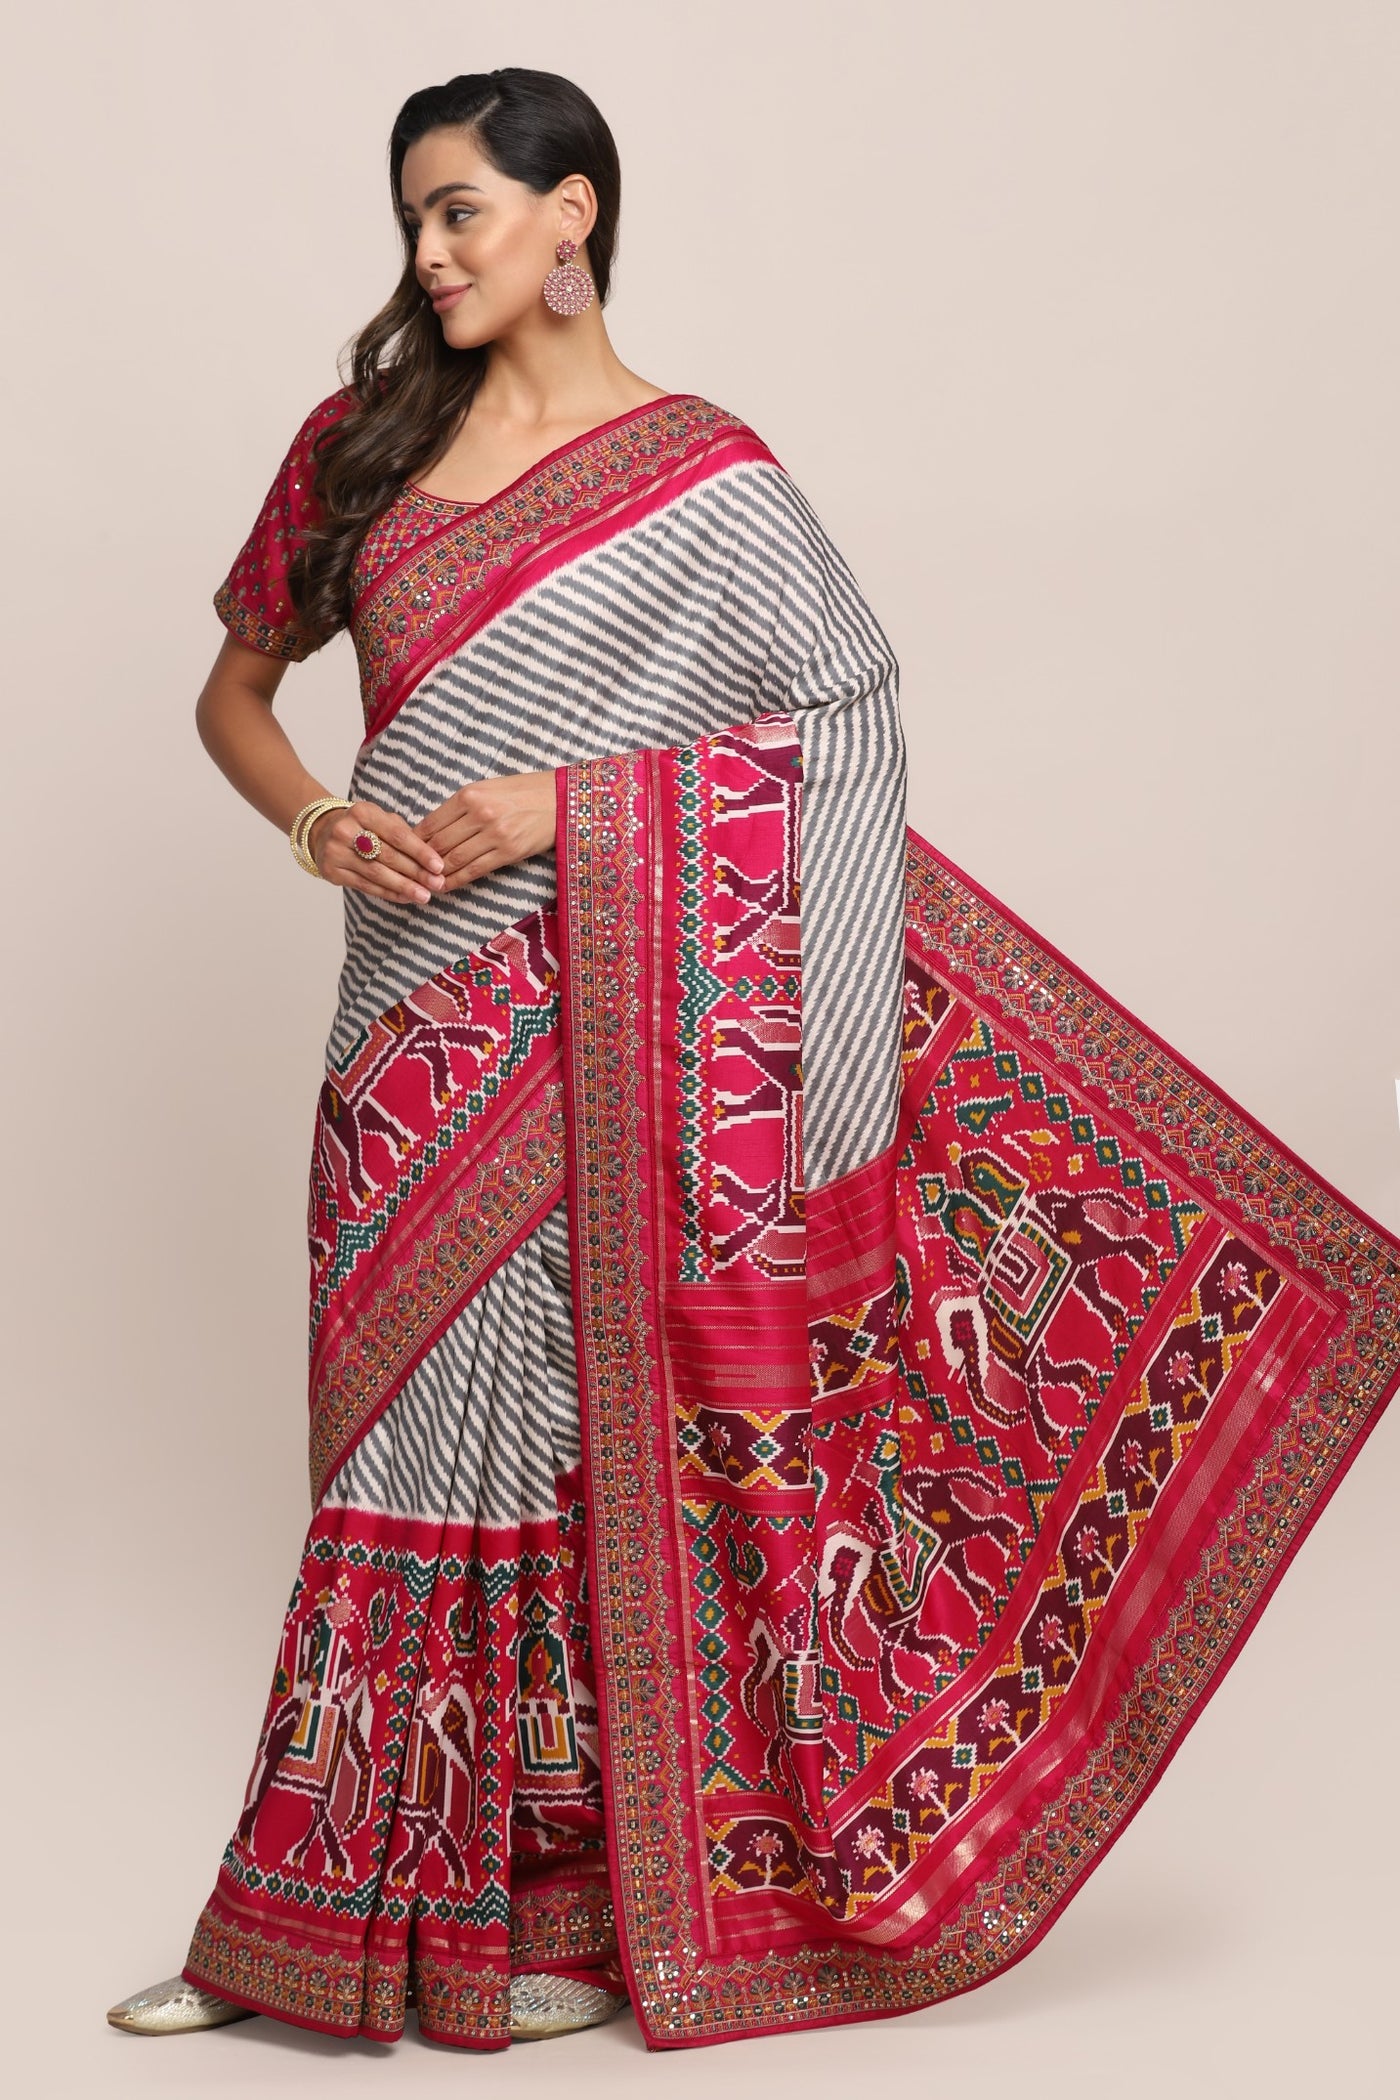 Classy pink color elephant motif printed and embroidered saree